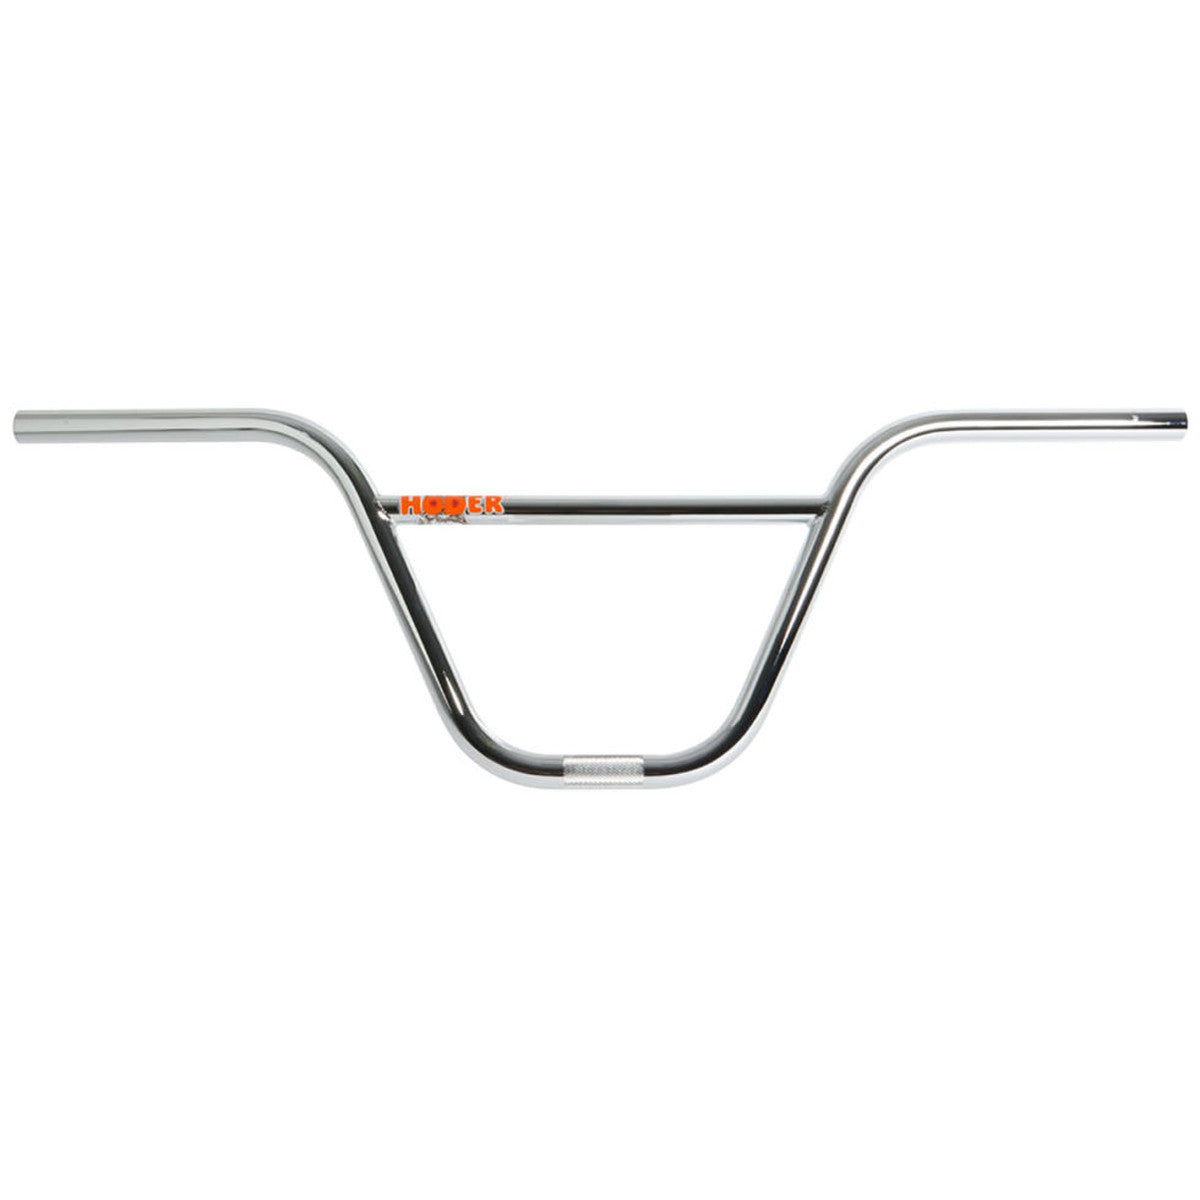 S&M 9" Hoder High Bar (Various Colors) - Downtown Bicycle Works 